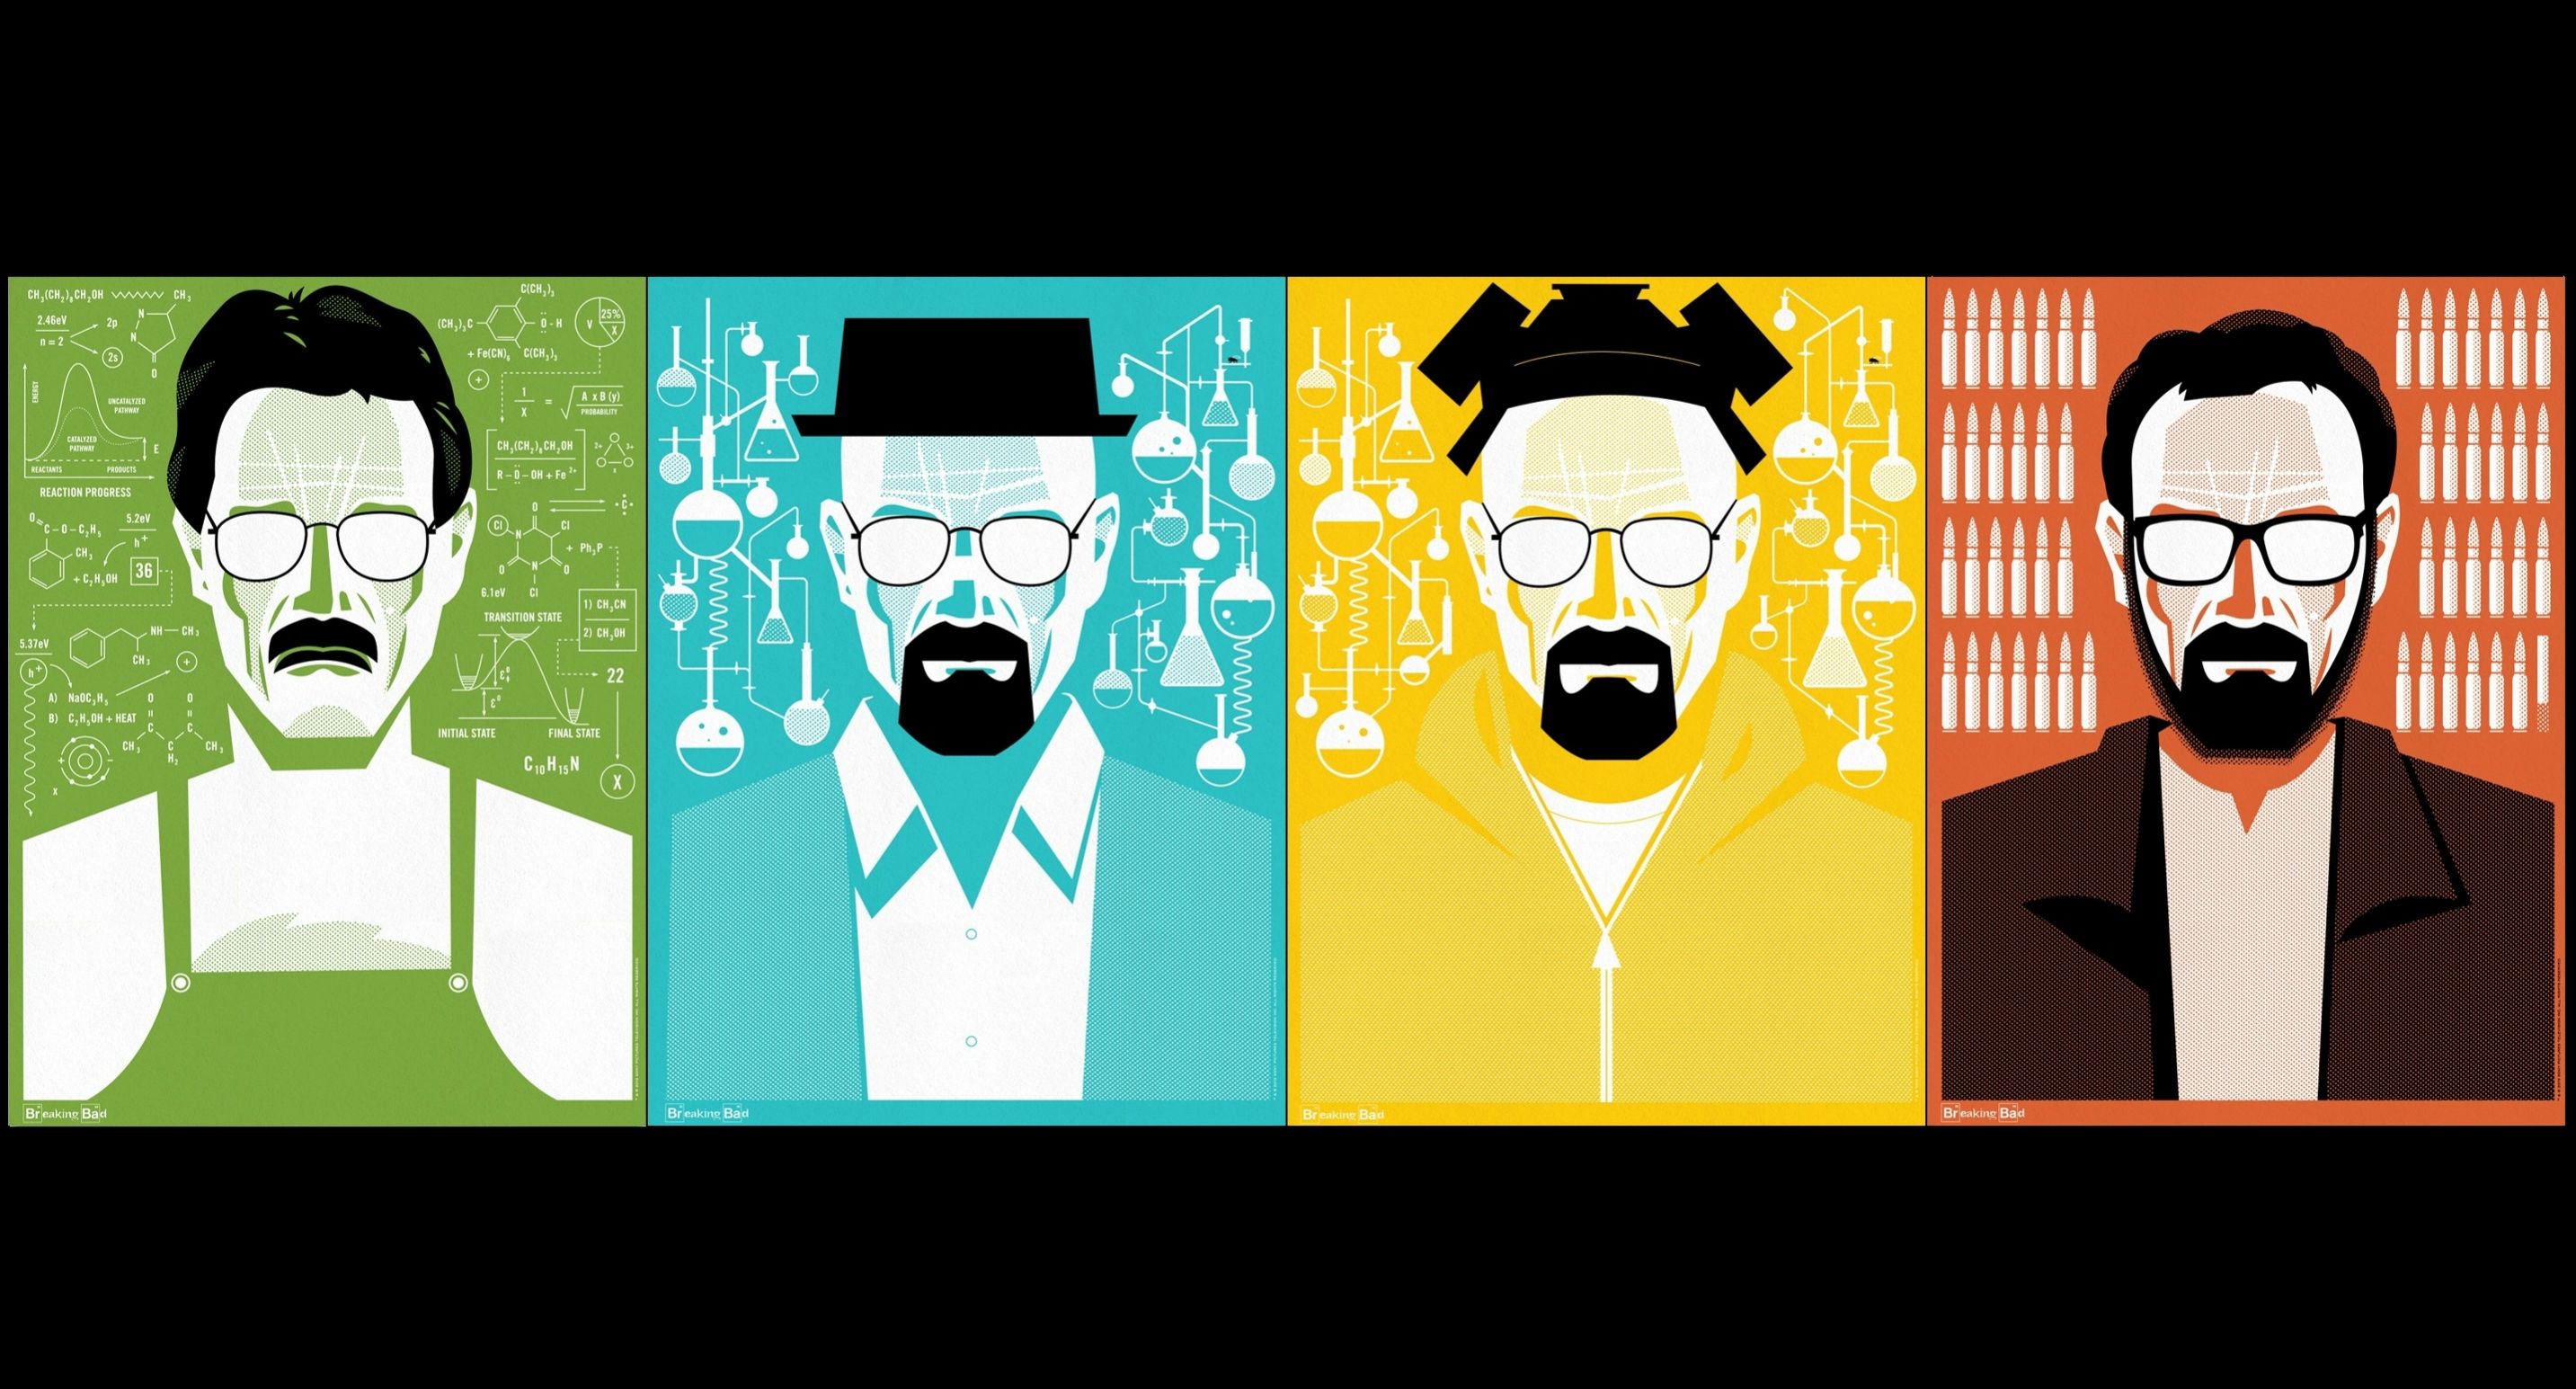  October 6 2015 By Stephen Comments Off on Breaking Bad HD Wallpapers 2866x1545